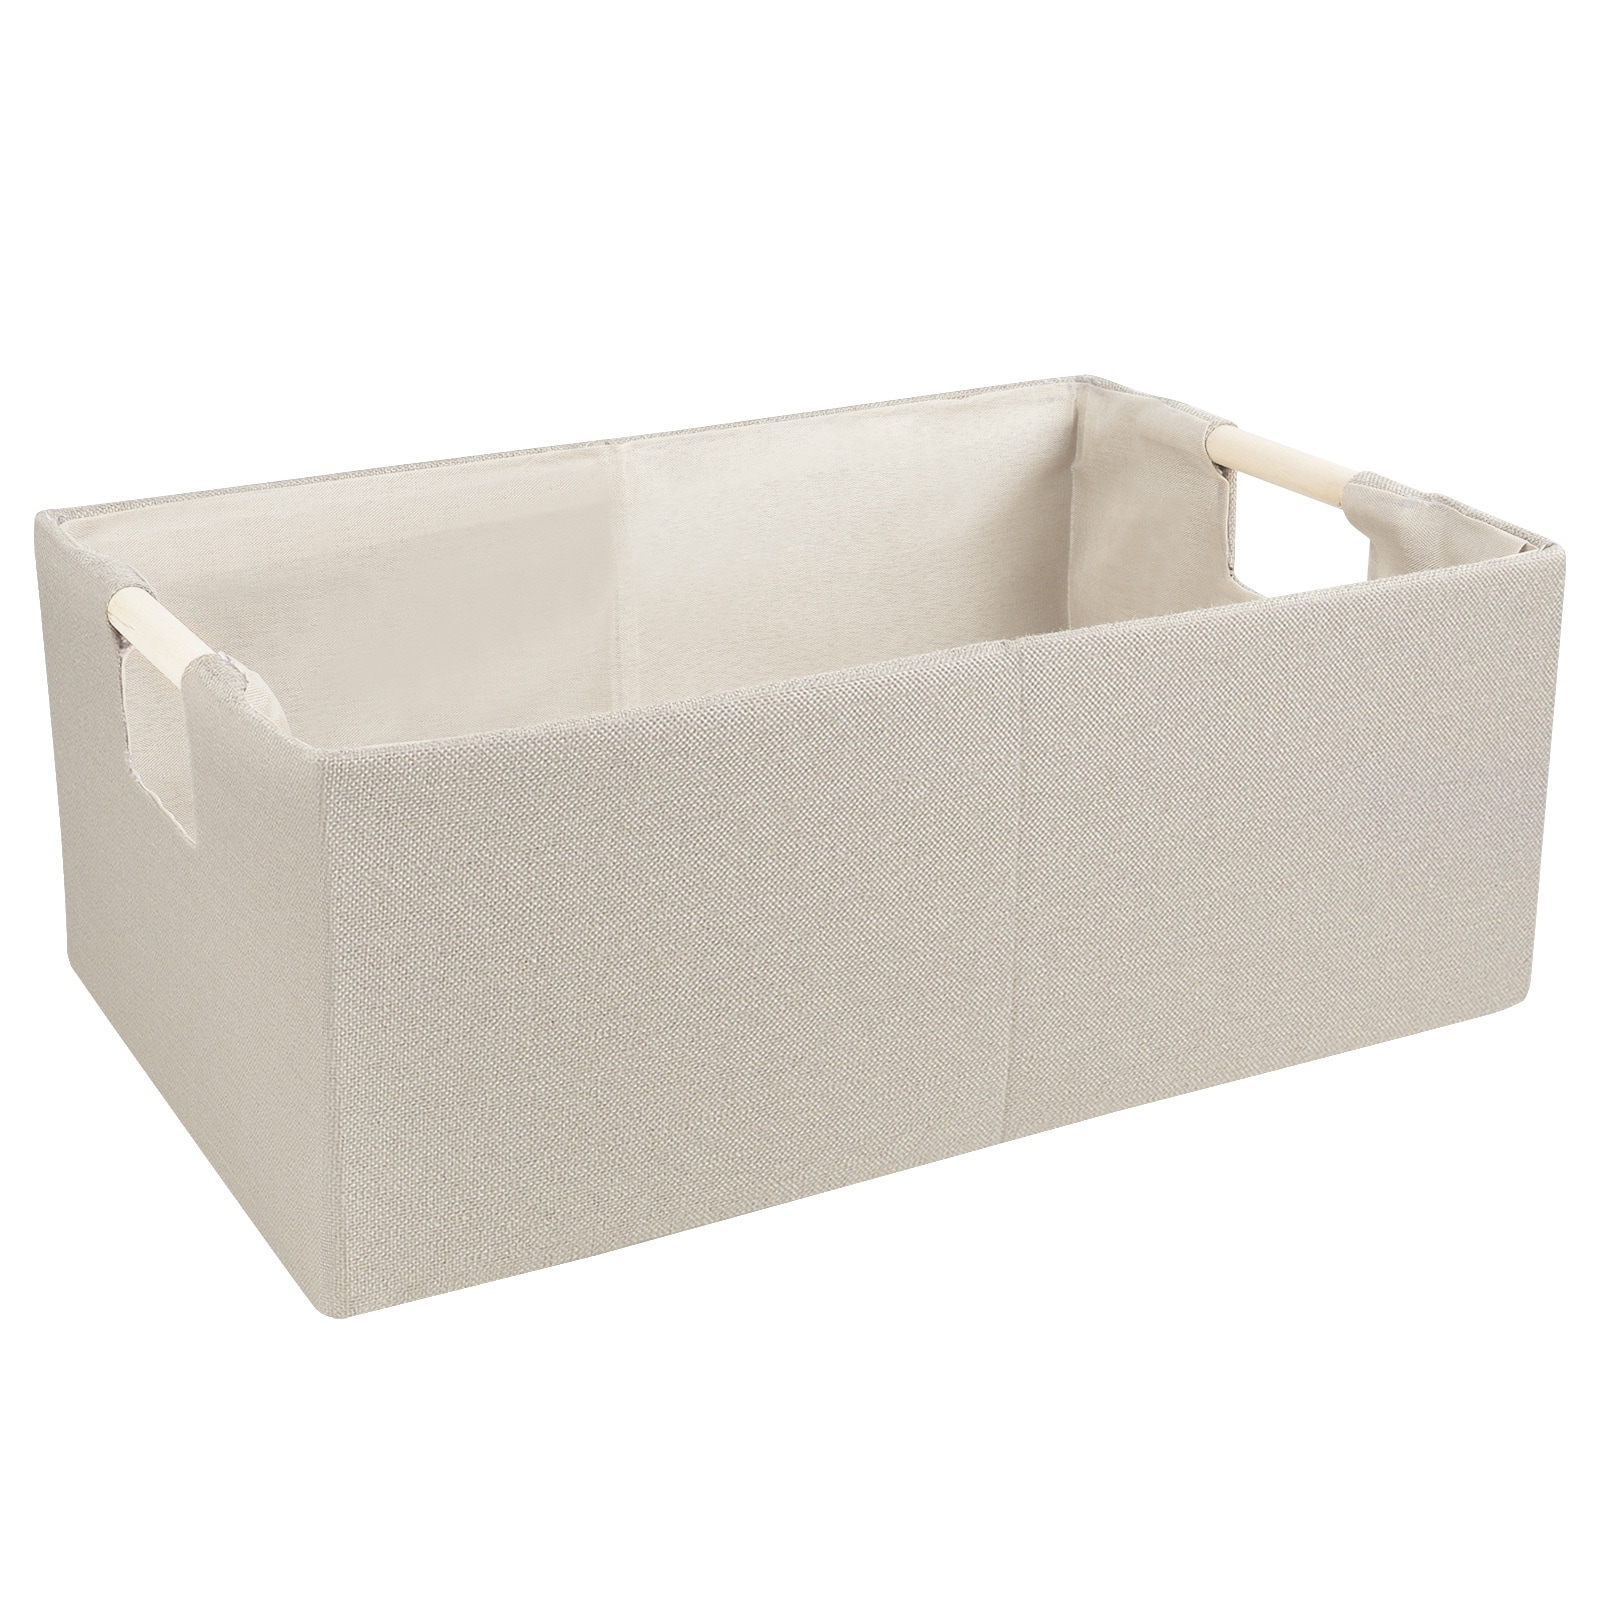 https://ak1.ostkcdn.com/images/products/is/images/direct/d2b7599d065d574880663072a2efaaf554814b96/Fabric-Foldable-Storage-Bins-Organizer-Container-W-Wood-Handles-2Pcs.jpg